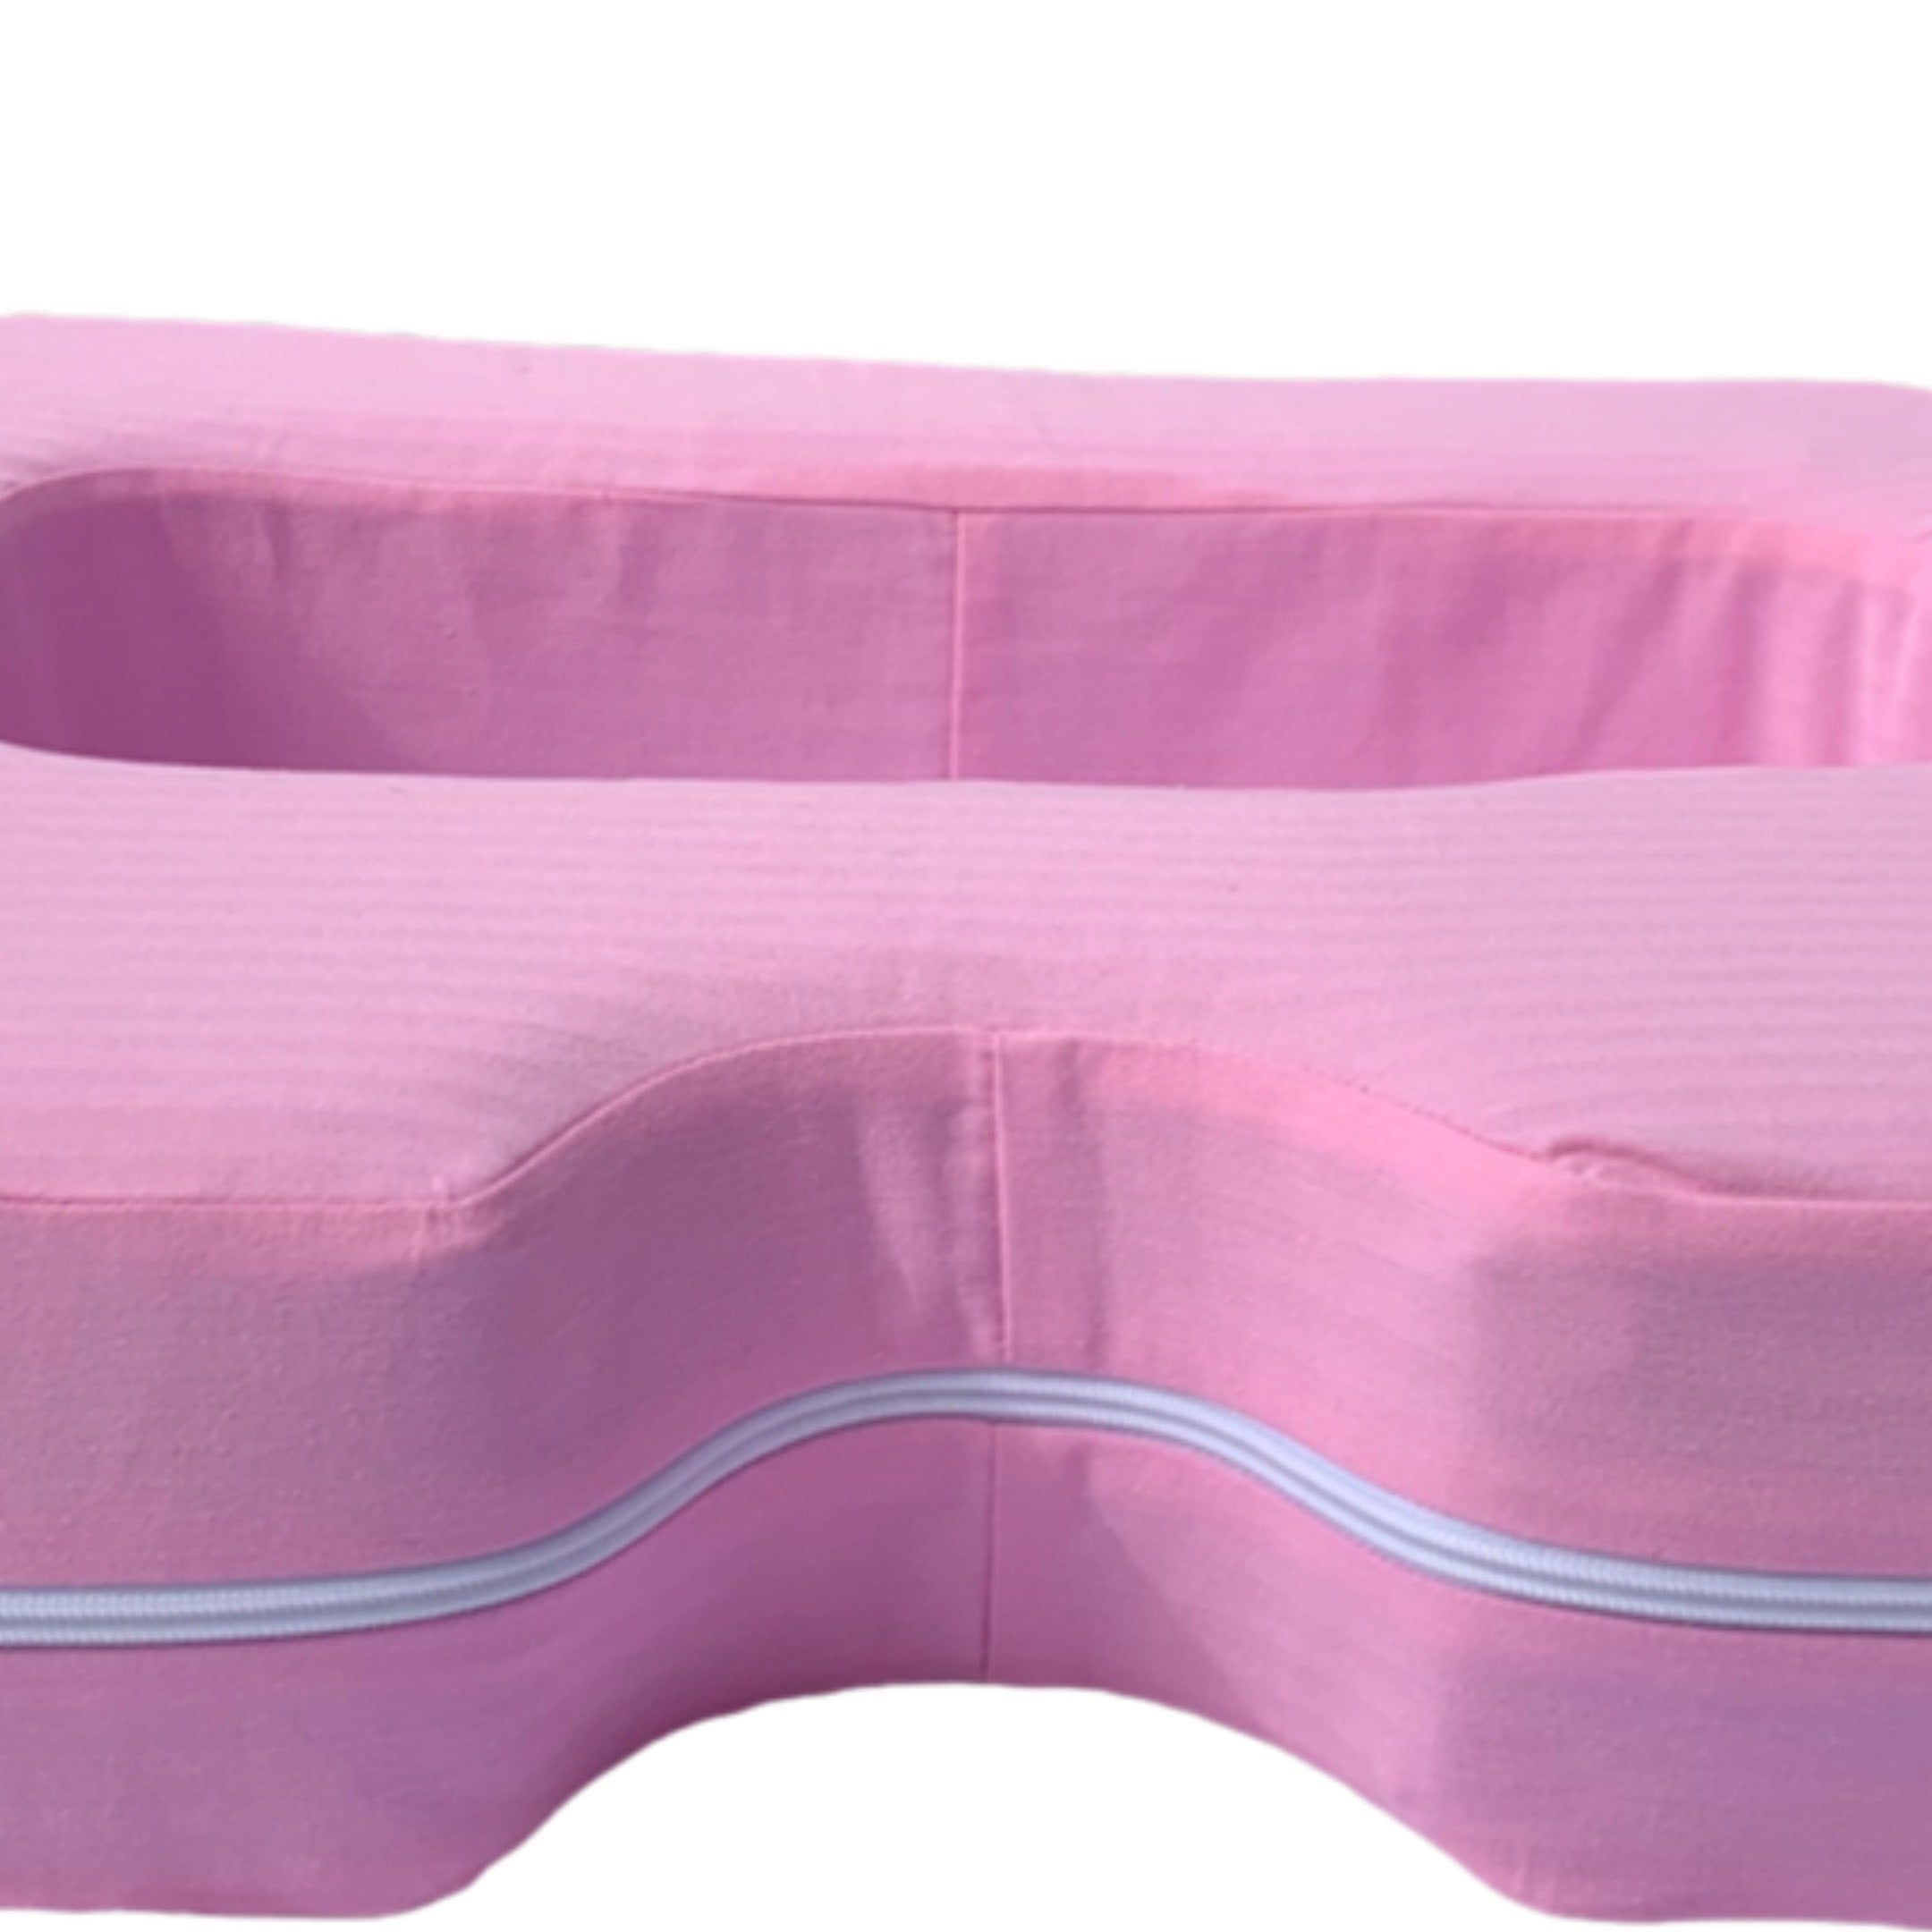 Medical Grade Breast Support Pillow